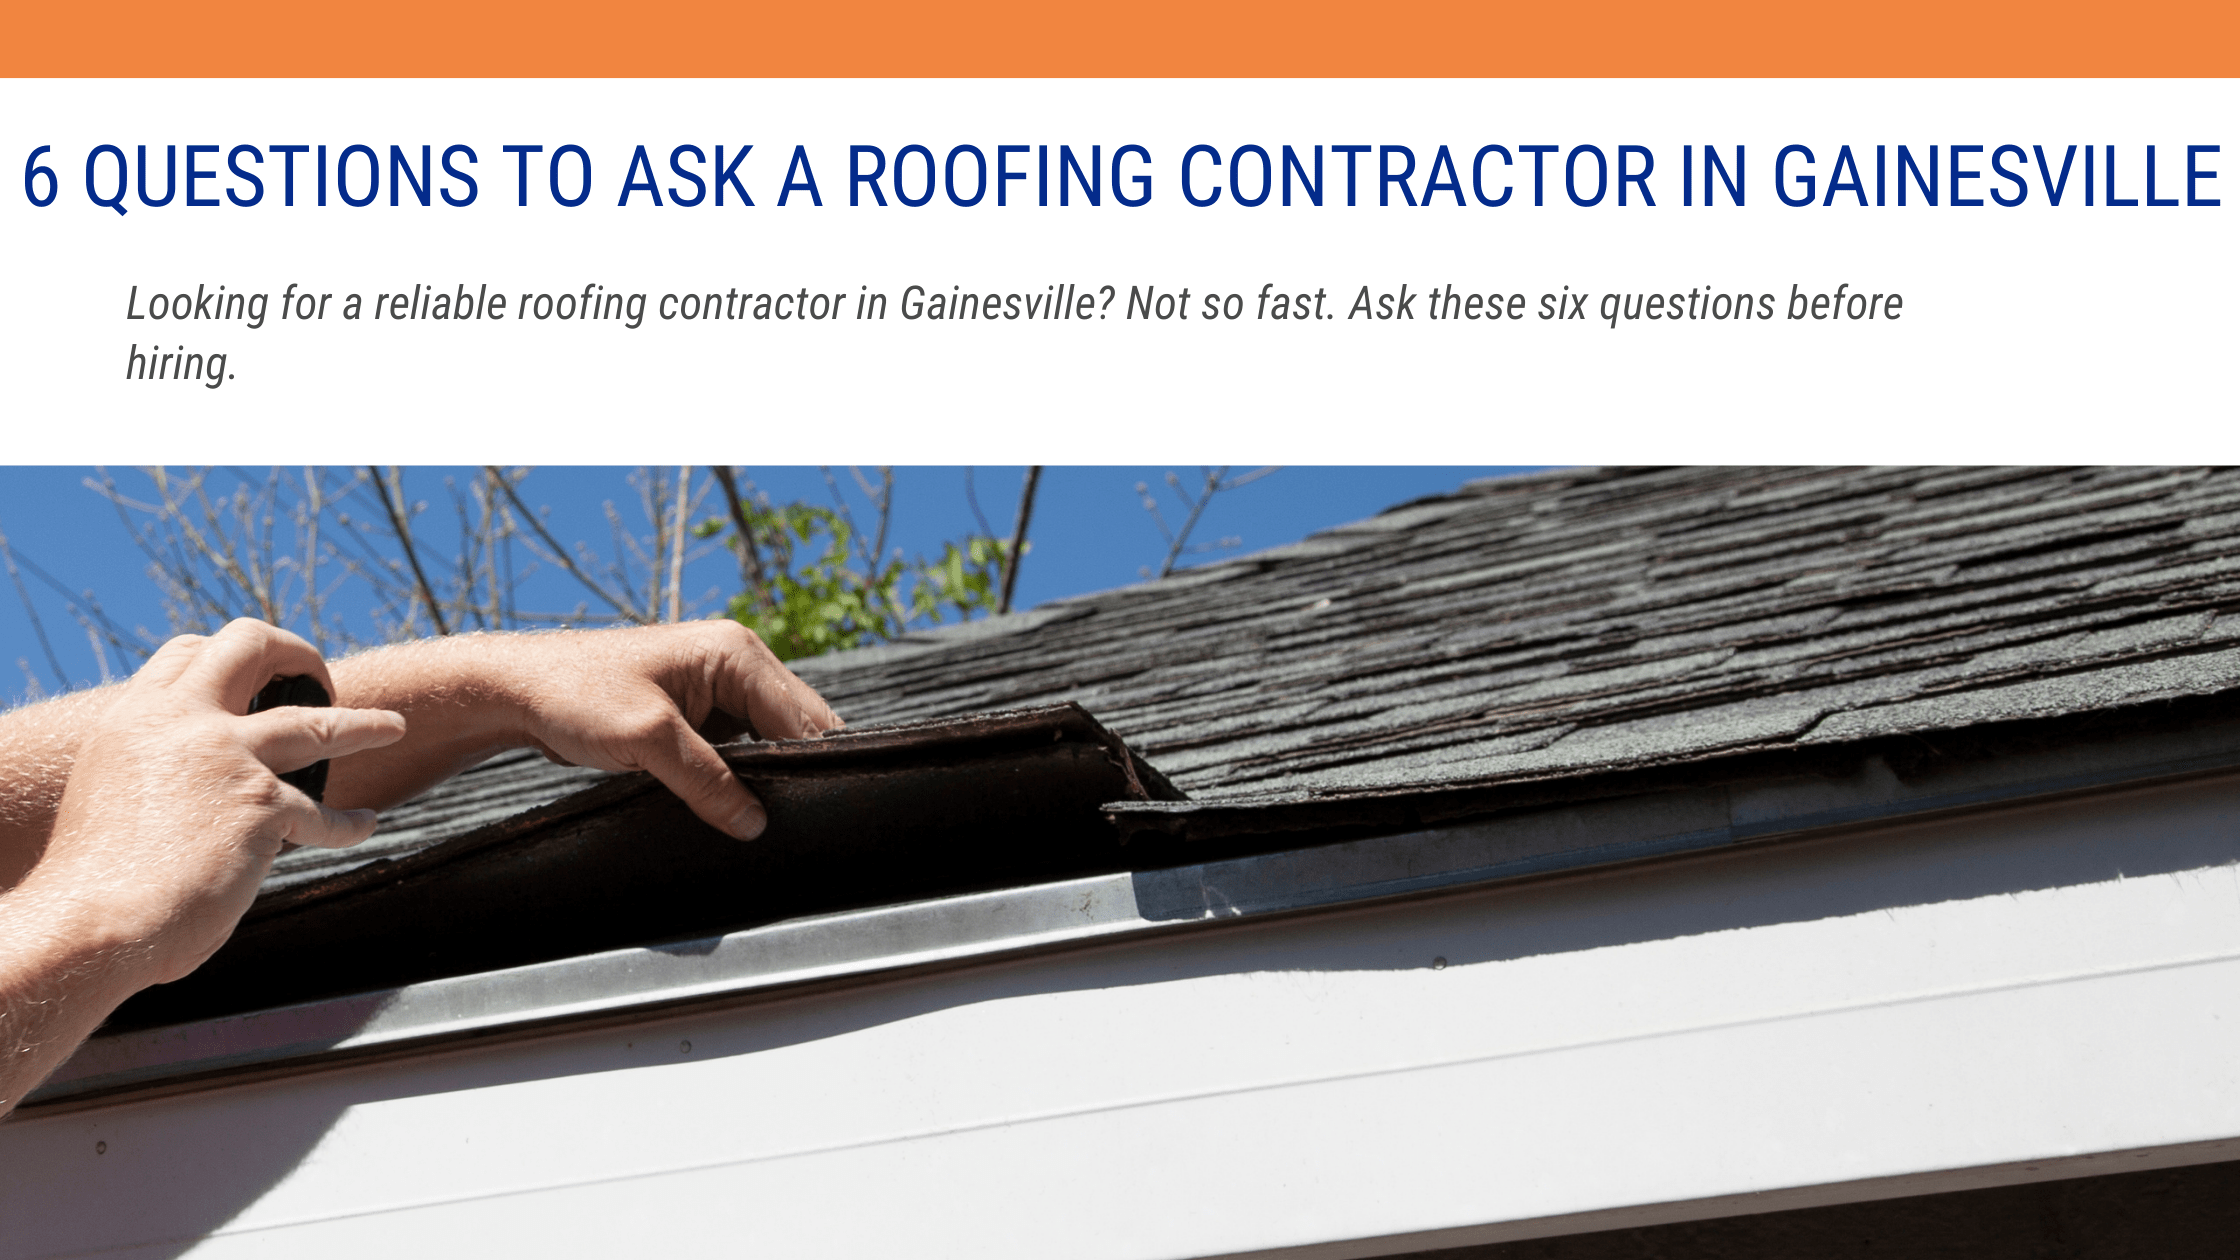 Roofing Contractor in Gainesville